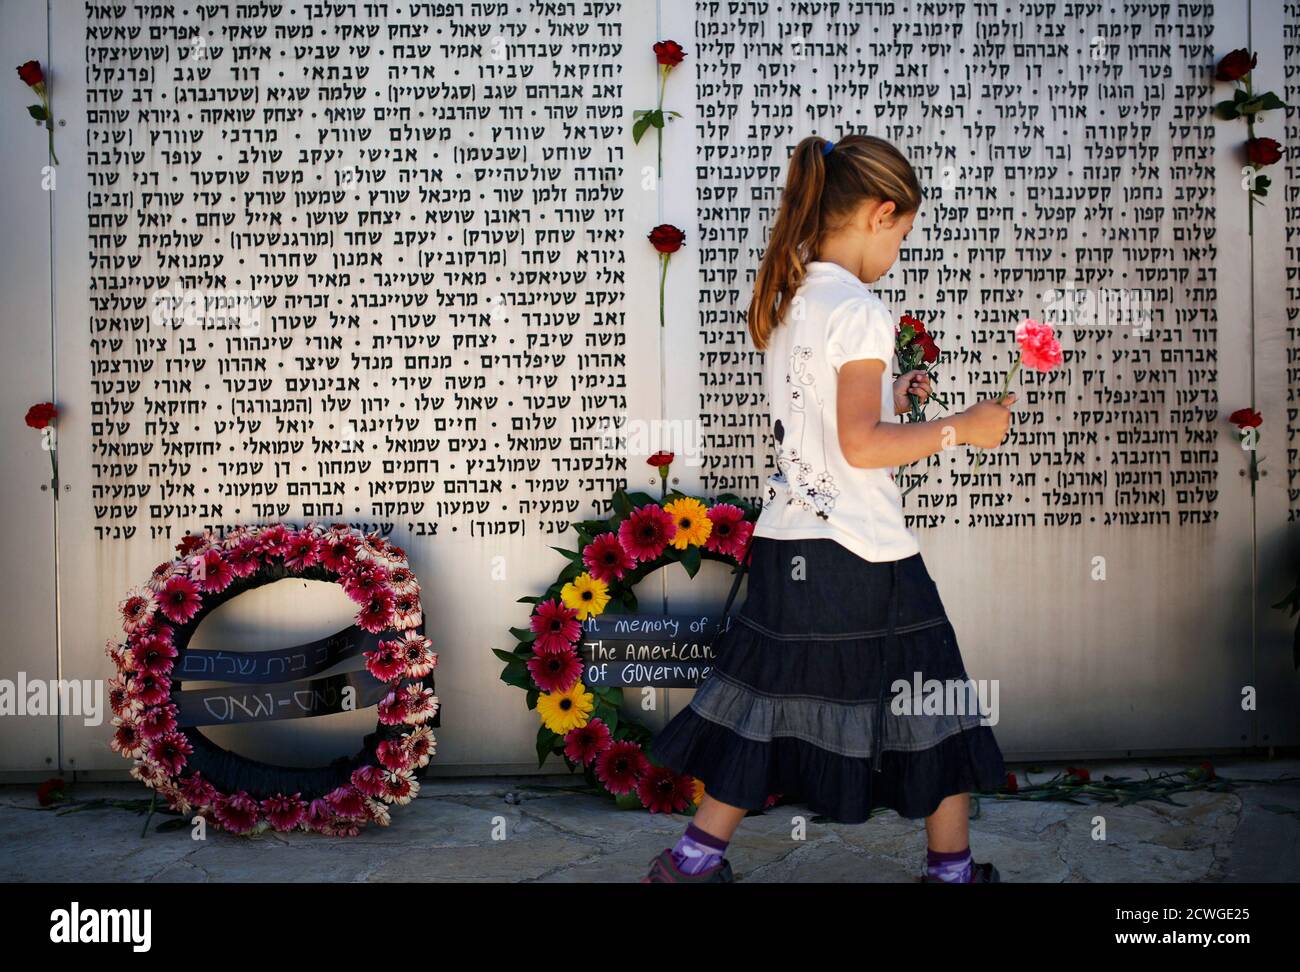 A girl holds flowers as she walks in front of a memorial wall, engraved with names of fallen Israeli soldiers, after a ceremony marking Memorial Day at the Israeli army's Armoured Corps' Memorial in Latrun, near Jerusalem April 15, 2013. Israel on Monday marks Memorial Day to commemorate its fallen soldiers. REUTERS/Amir Cohen (ISRAEL - Tags: ANNIVERSARY MILITARY POLITICS CONFLICT TPX IMAGES OF THE DAY) Stock Photo